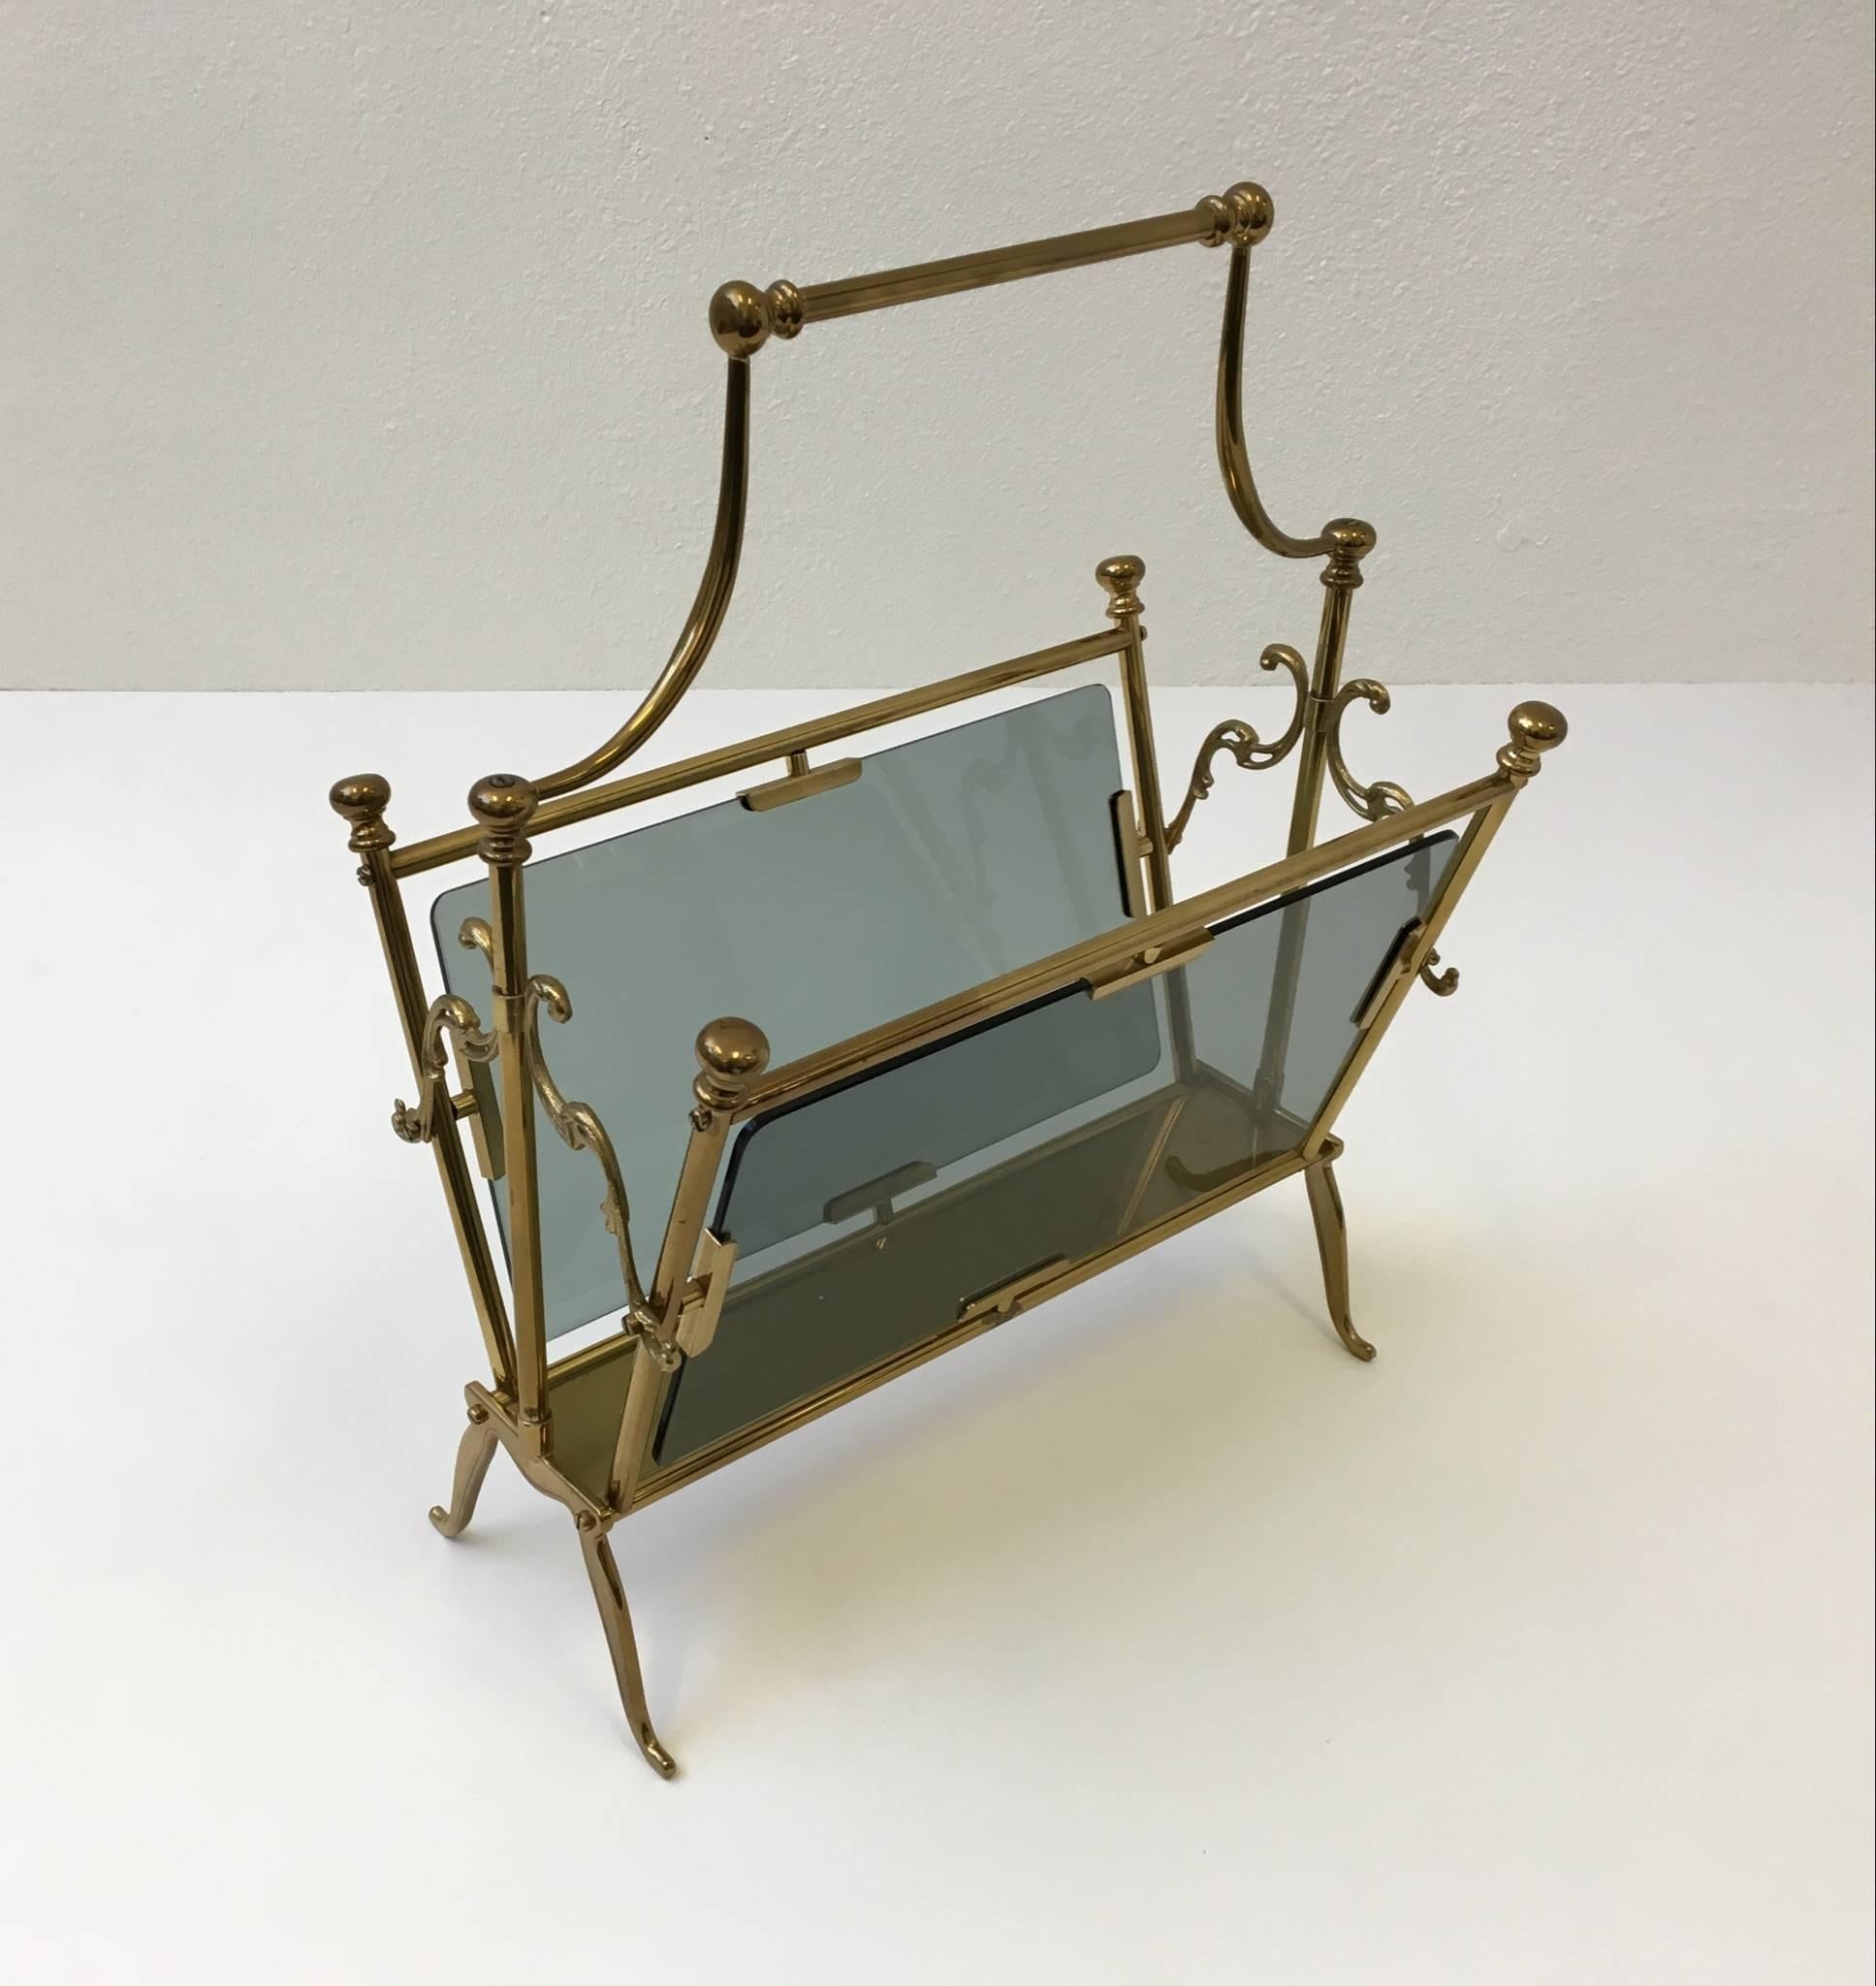 A glamorous 1960s Italian brass and smoked glass magazine holder by Maison Baguès.
The label by Maison Baguès is underneath (see detail photos)
Dimensions: 22